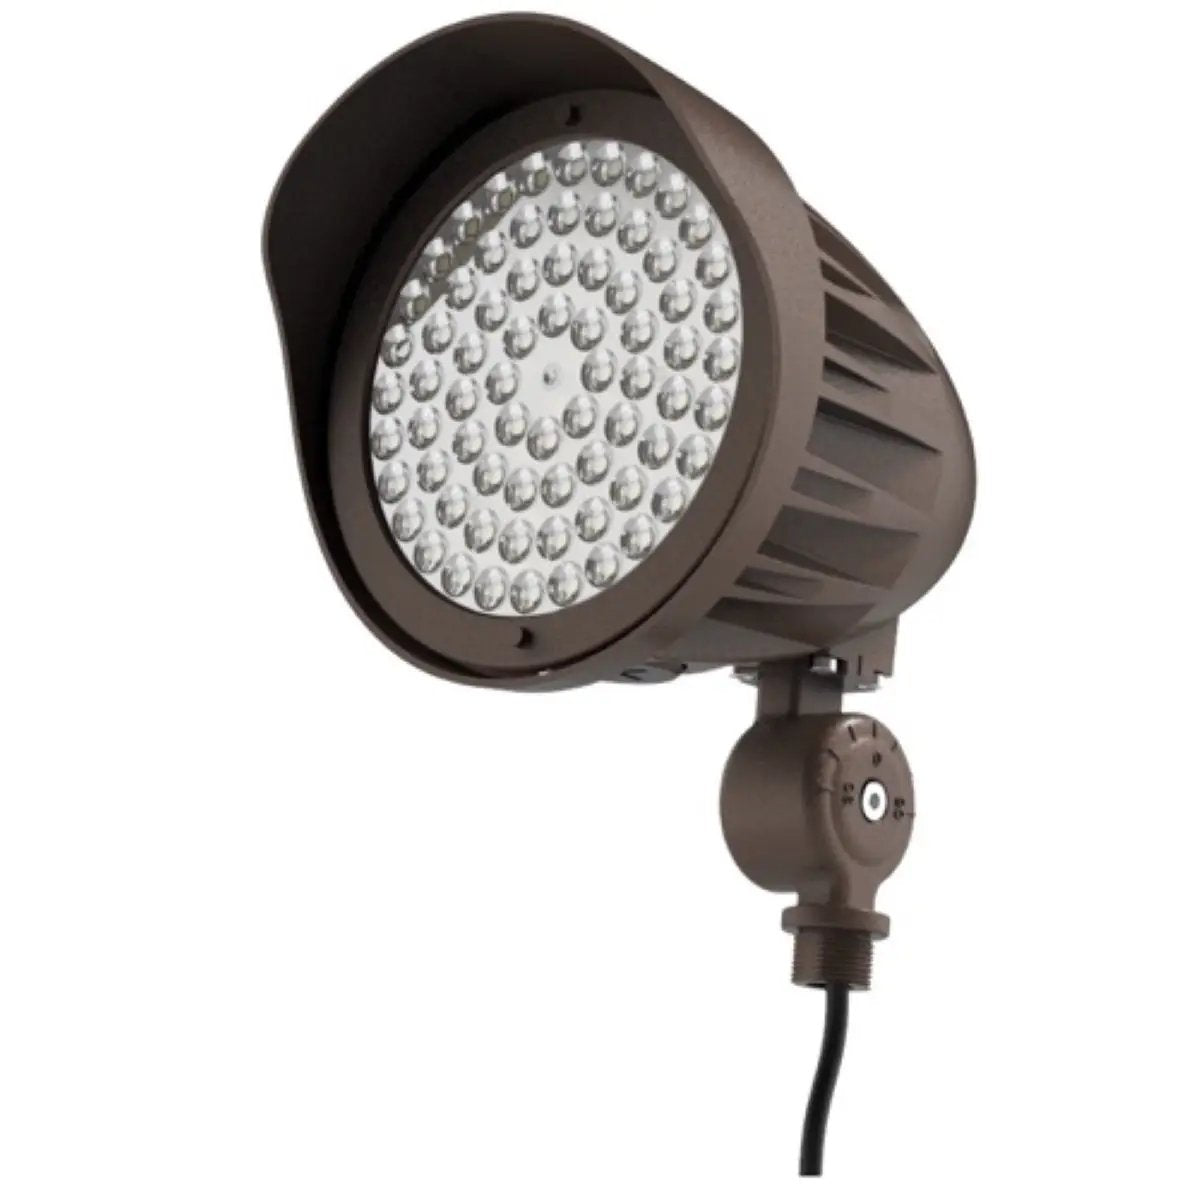 Mini LED Flood Light with cable, close-up of light bulb. Provides 1998-3292 lumens of tunable white light. Power and color select technology for easy on-site customization. Built-in photocell and twist on/off lens cap. Ideal for outdoor applications. Keystone Technologies.